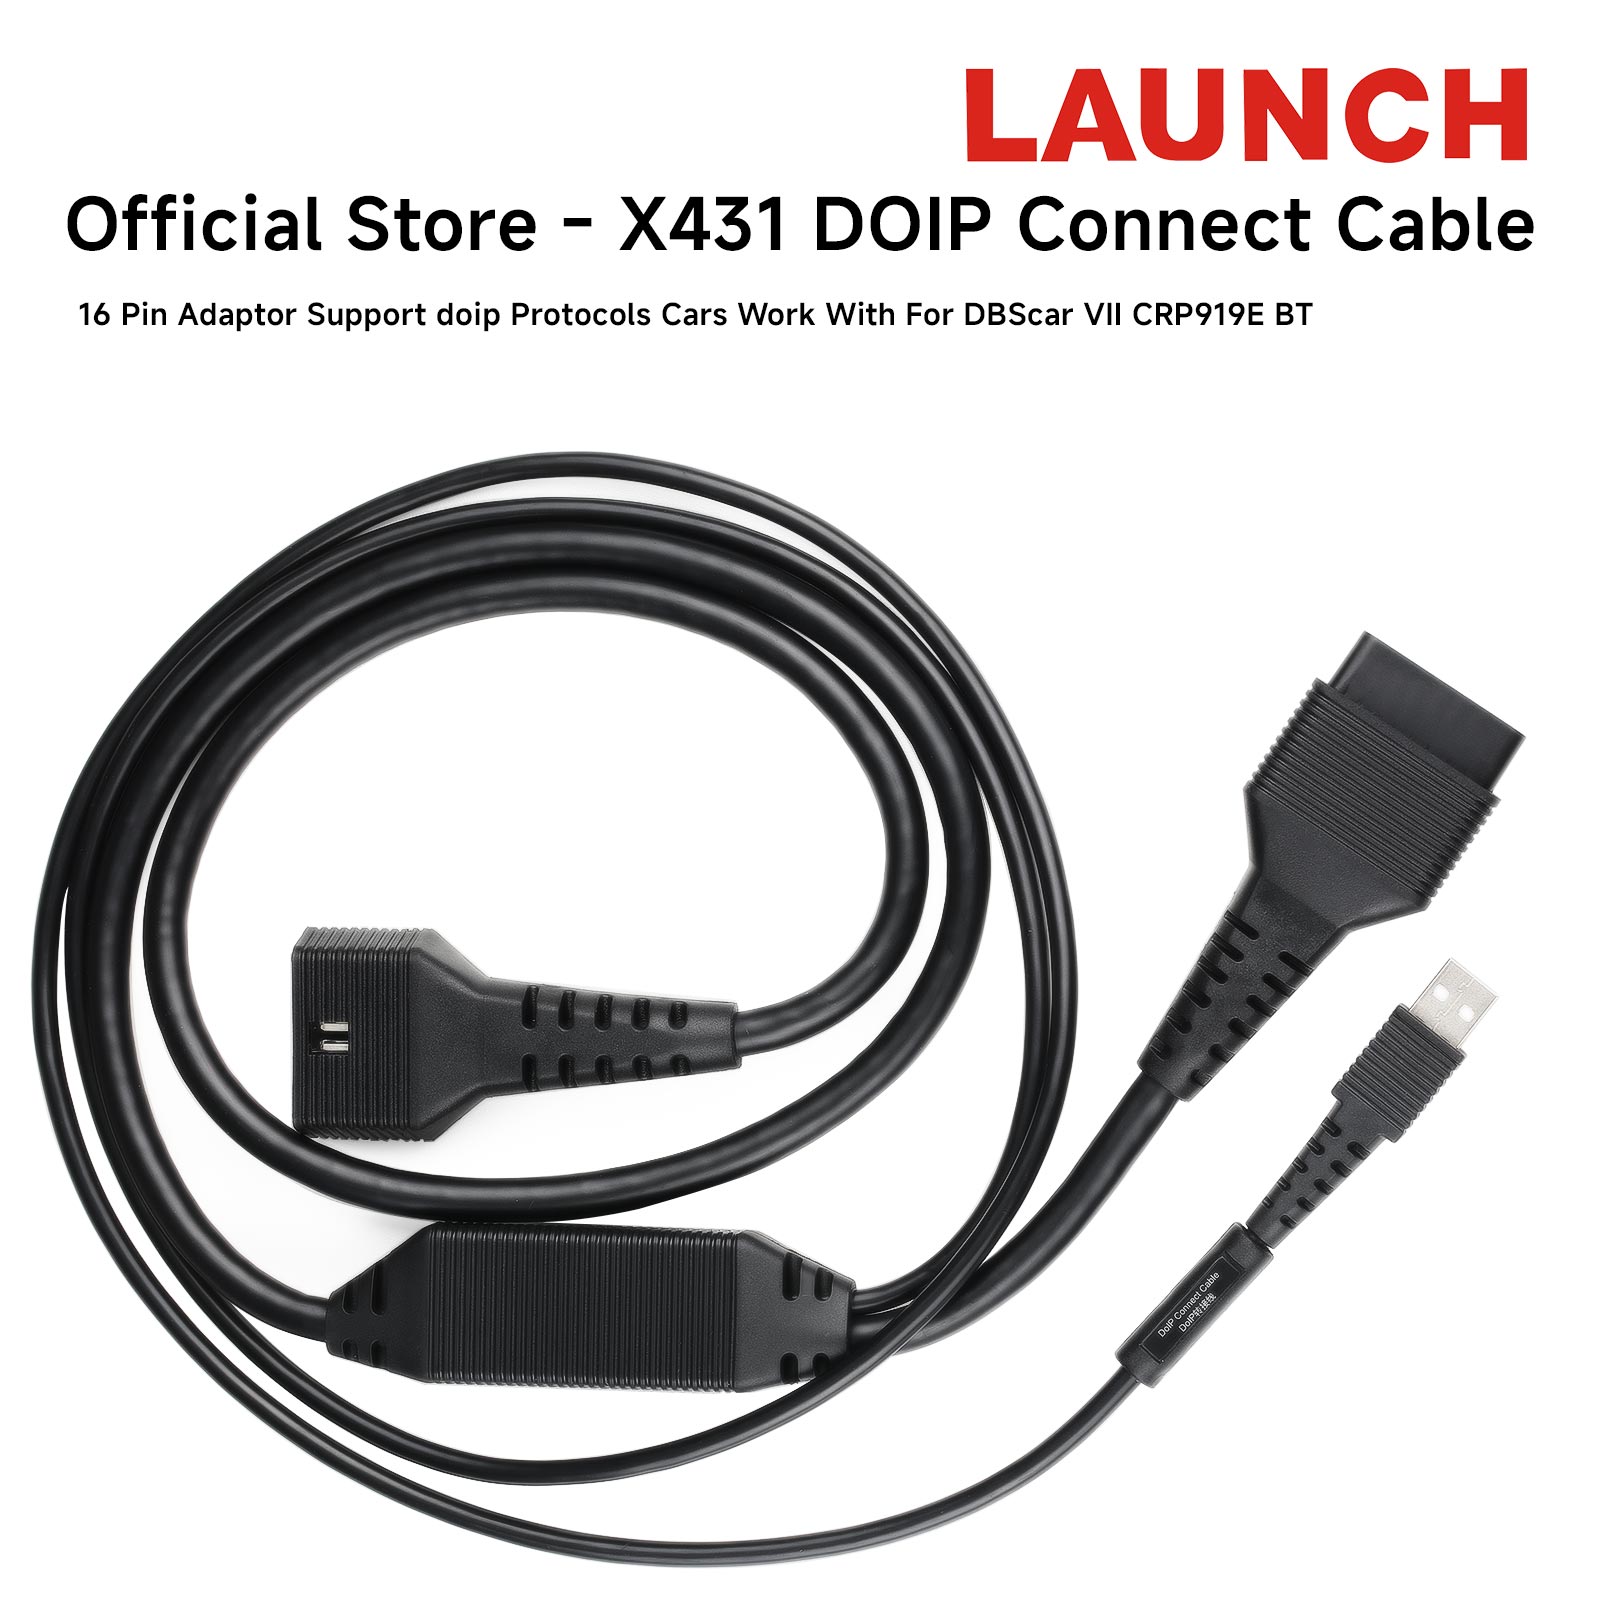 LAUNCH DOIP Adapter Cable for Devices with CAR VII Bluetooth Connectors